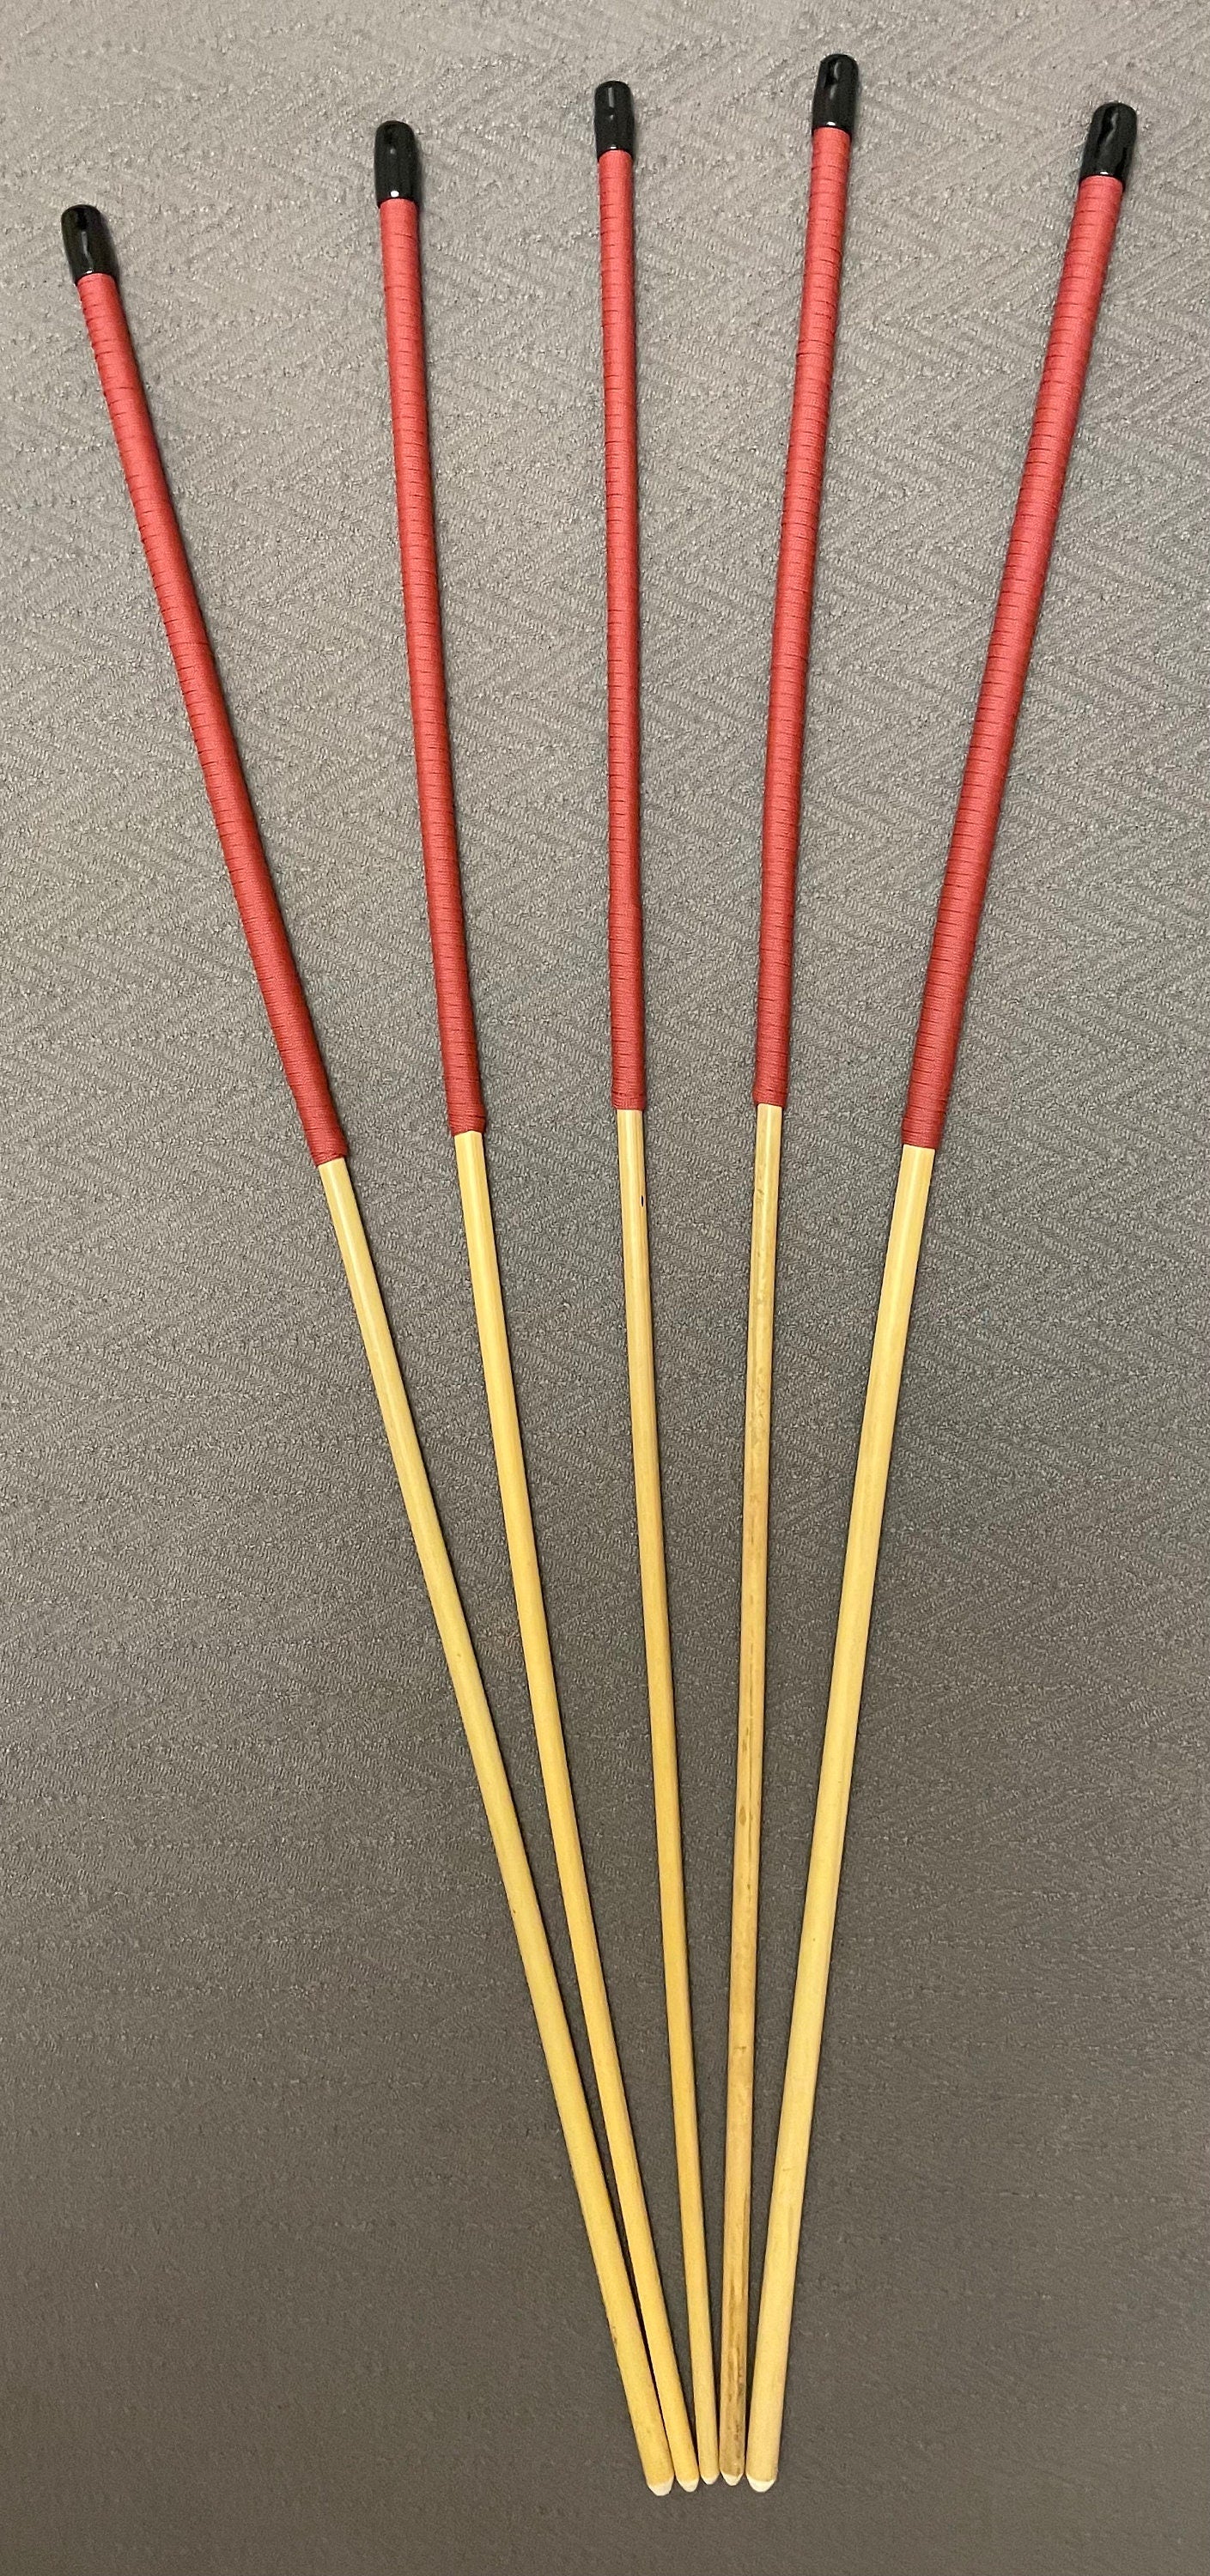 Set of 5 Knotless Dragon Canes / No Knot Rattan Canes / School Canes with Red Paracord Handles - 91 cms Length